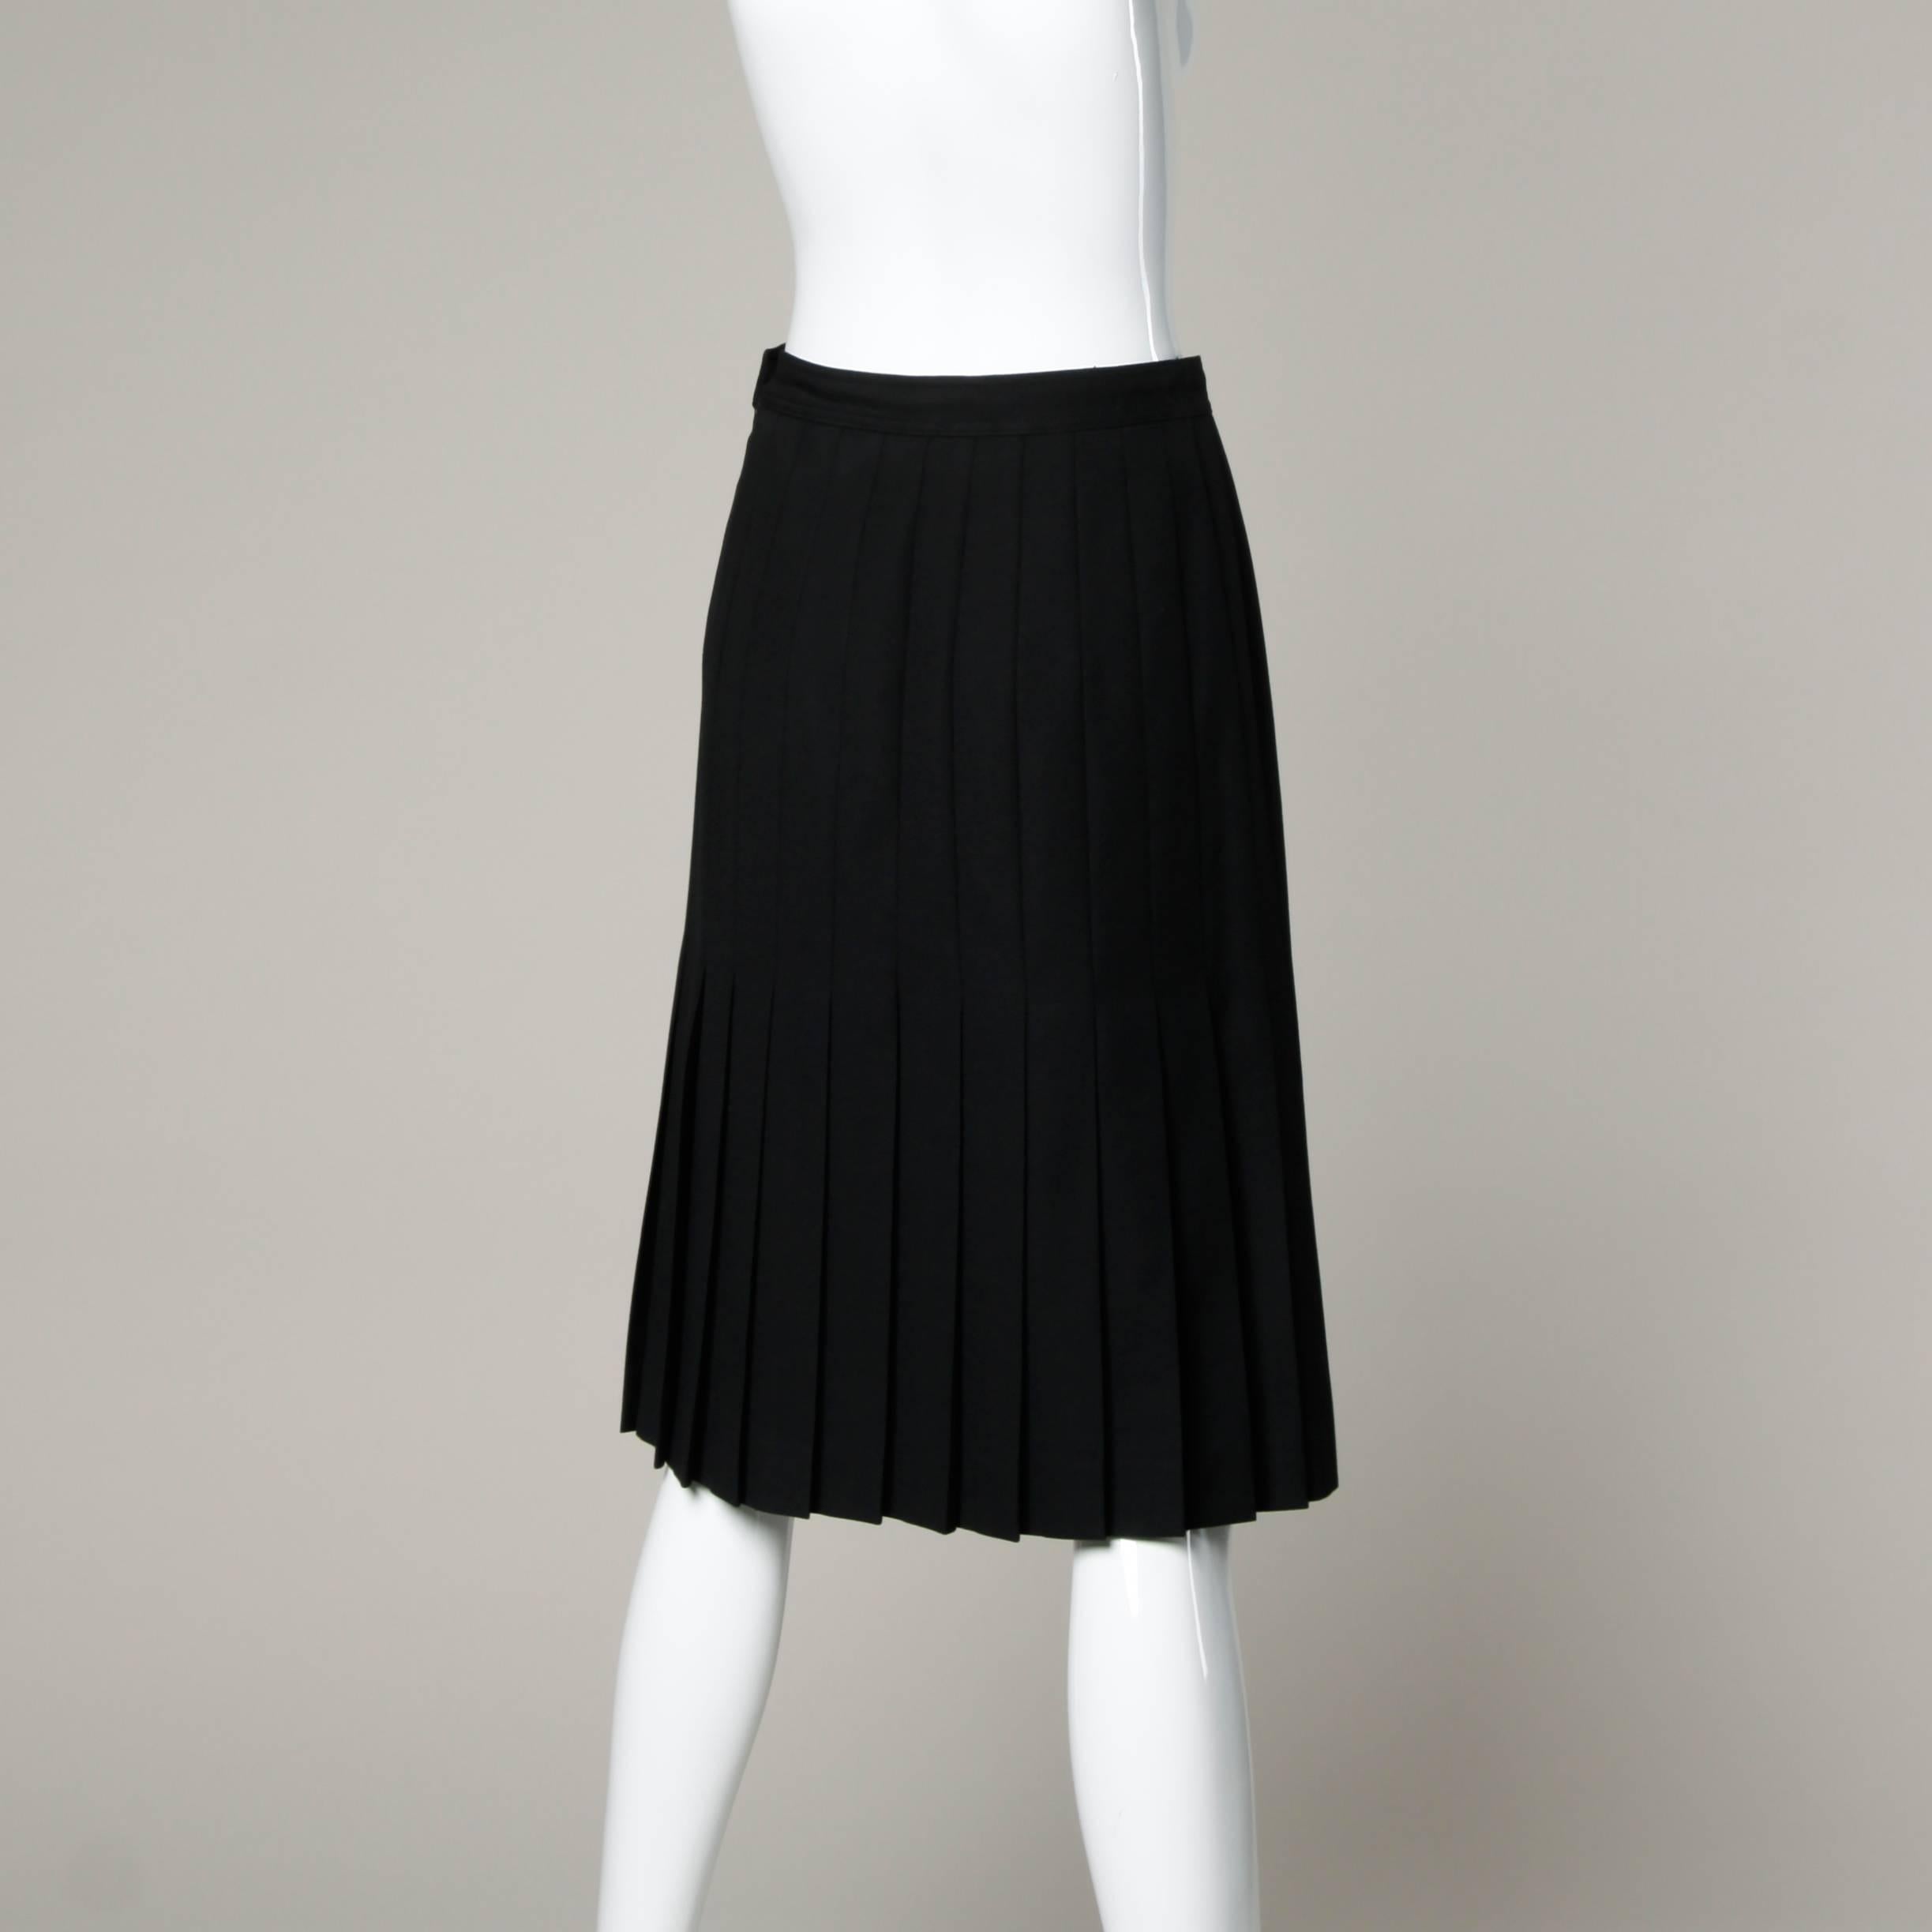 Gorgeous Valentino for Neiman Marcus black wool pleated skirt. Beautiful quality and construction!

Details:

Unlined
Side Zip and Button Closure 
Marked Size: IT 44/ US 10
Estimated Size: Medium
Color: Black 
Fabric: 100% Wool 
Label: